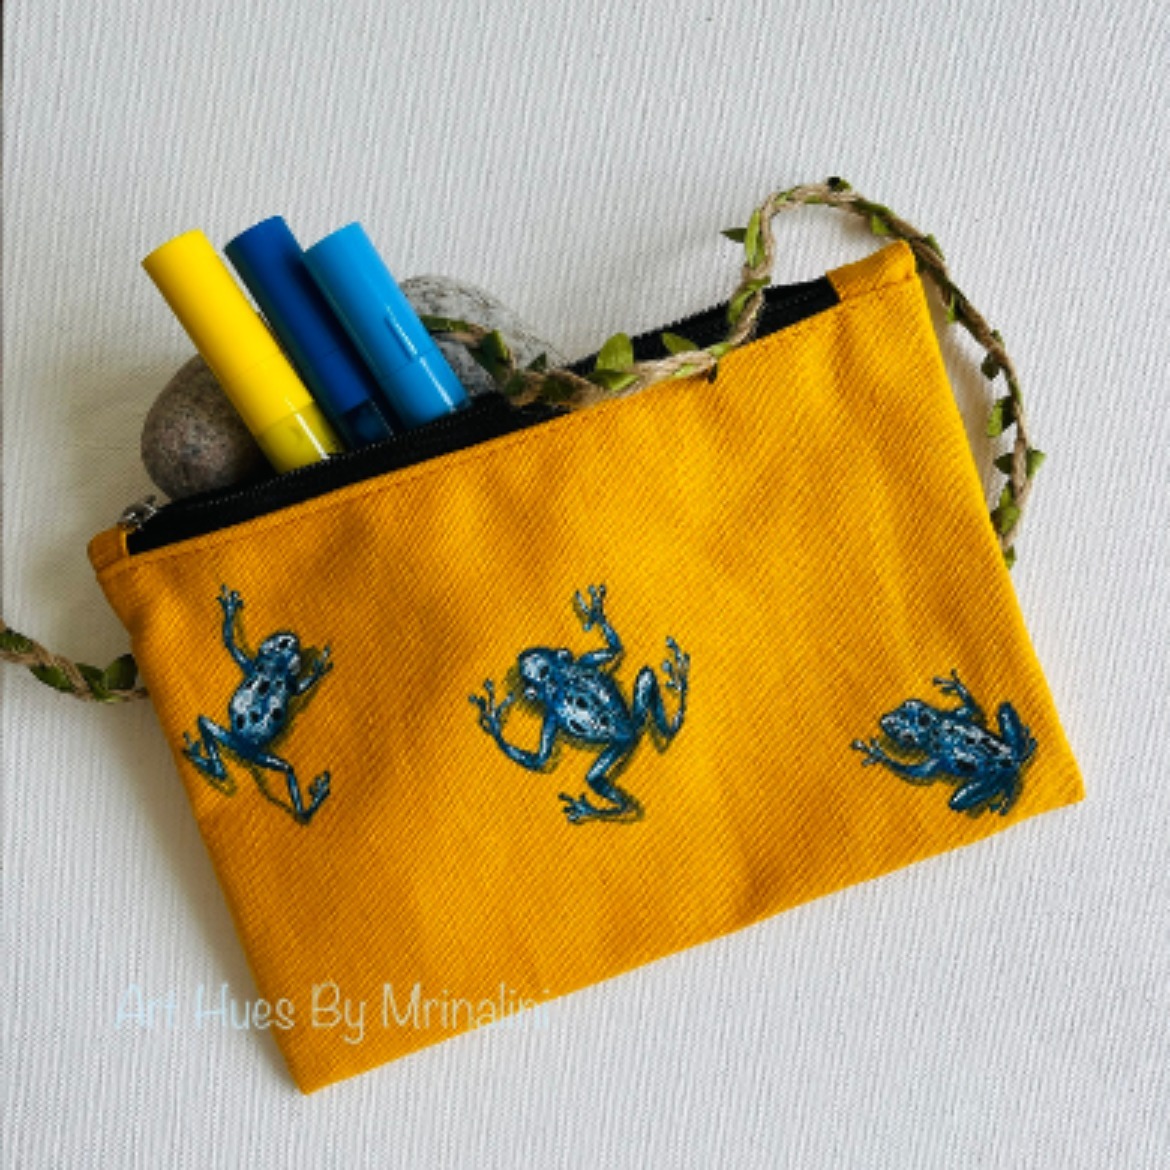 Blue Poison dart frog hand painted on a fabric pouch to store make up